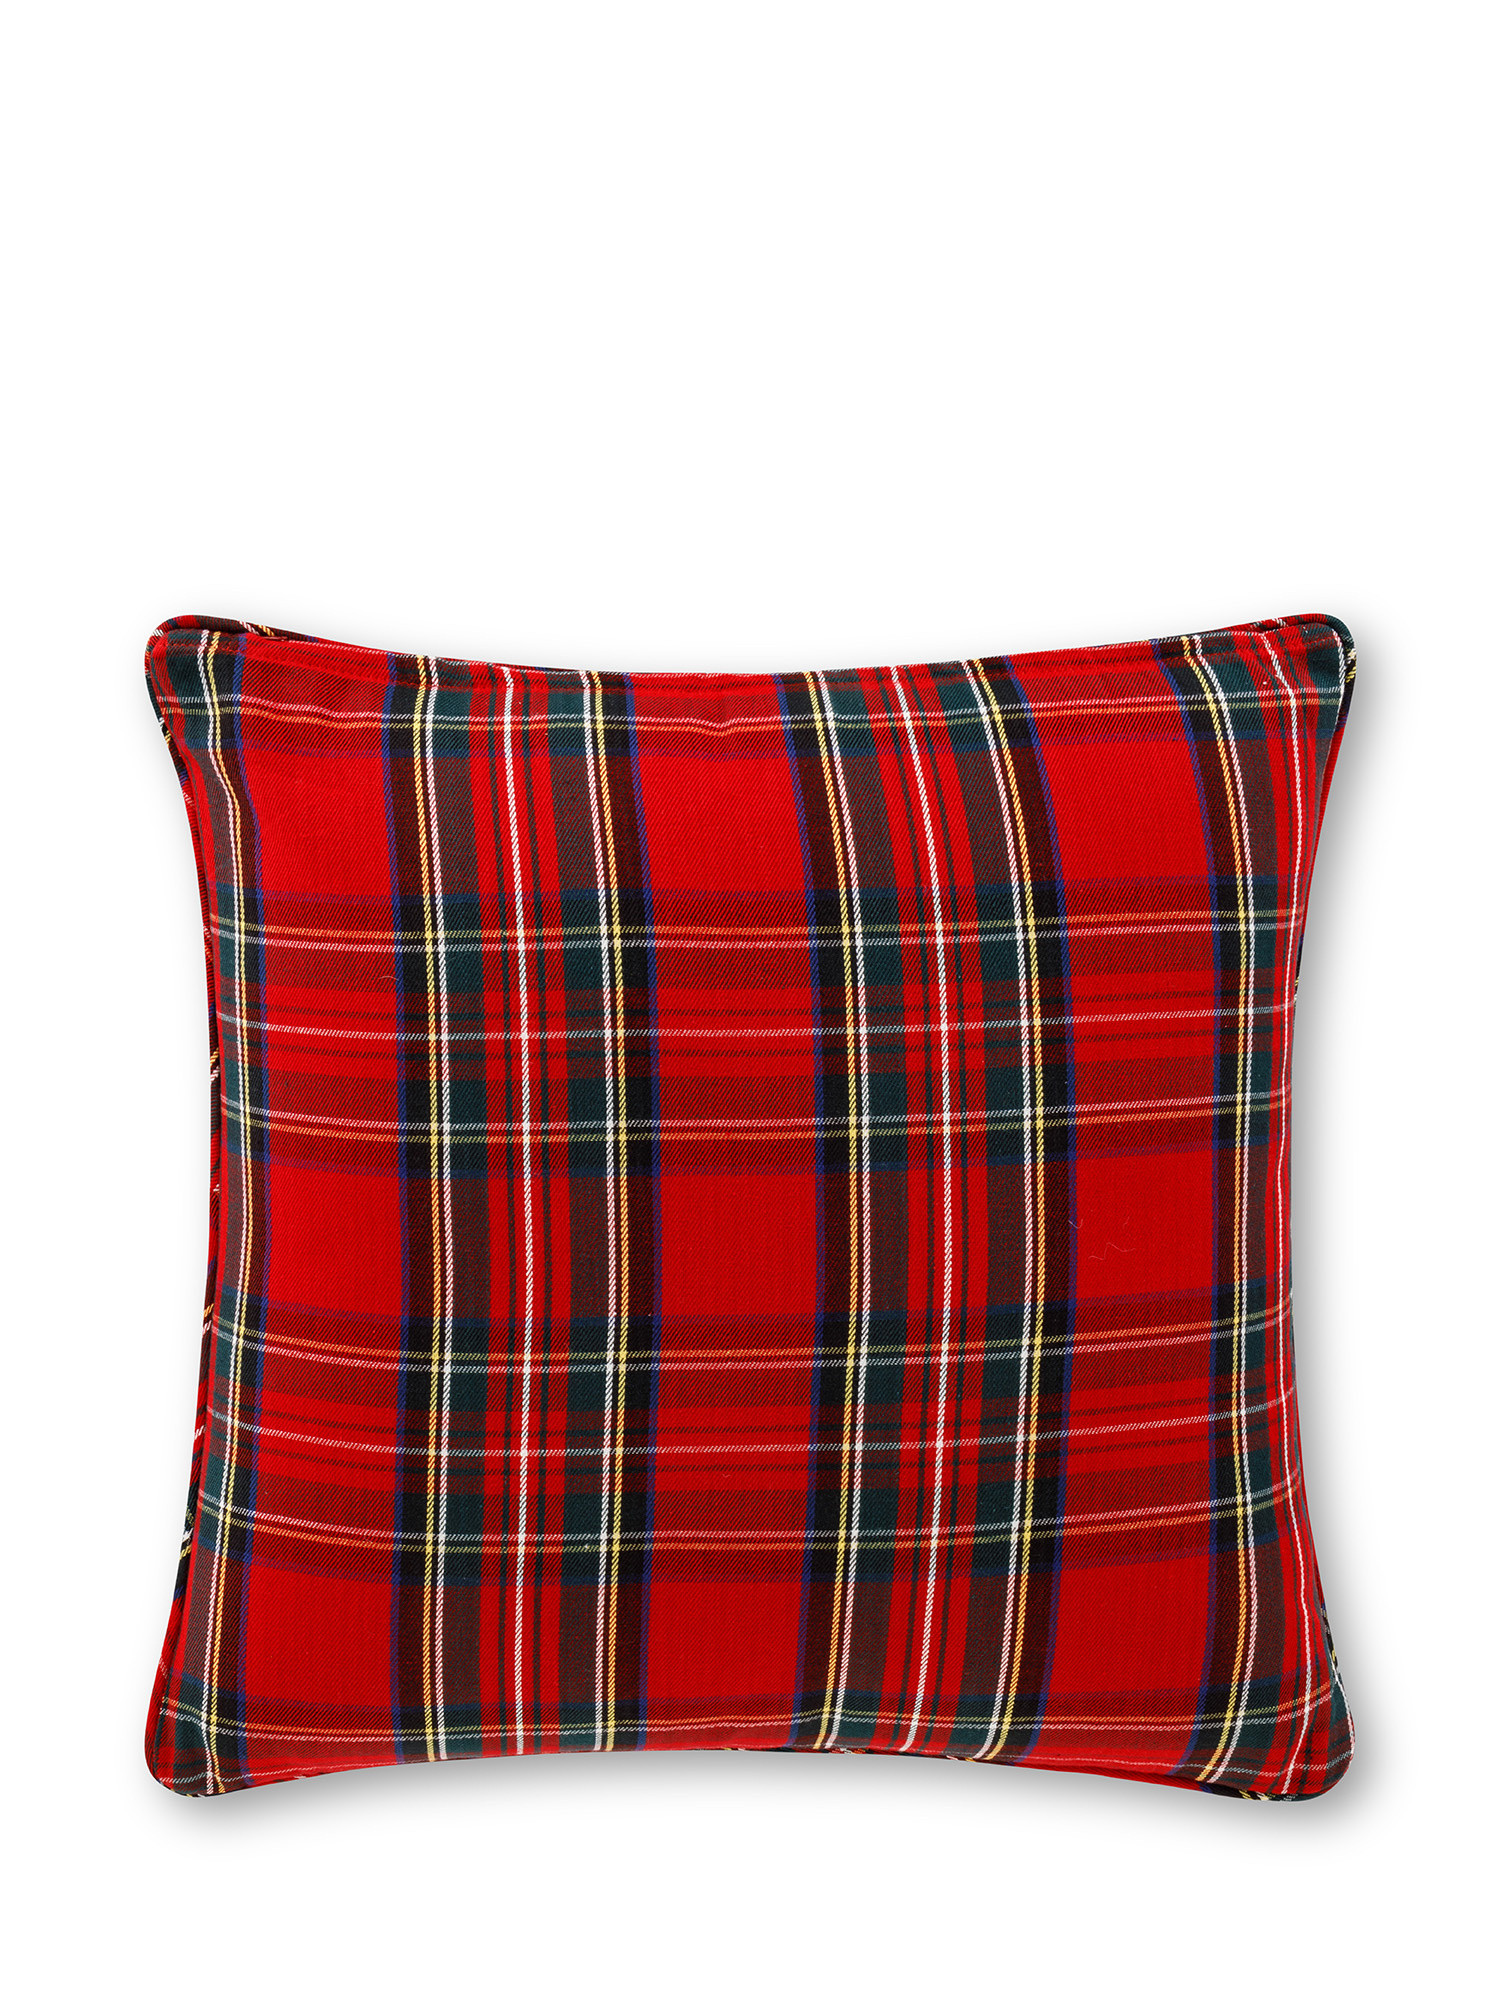 Cuscino in tartan 45x45 cm, Rosso, large image number 1